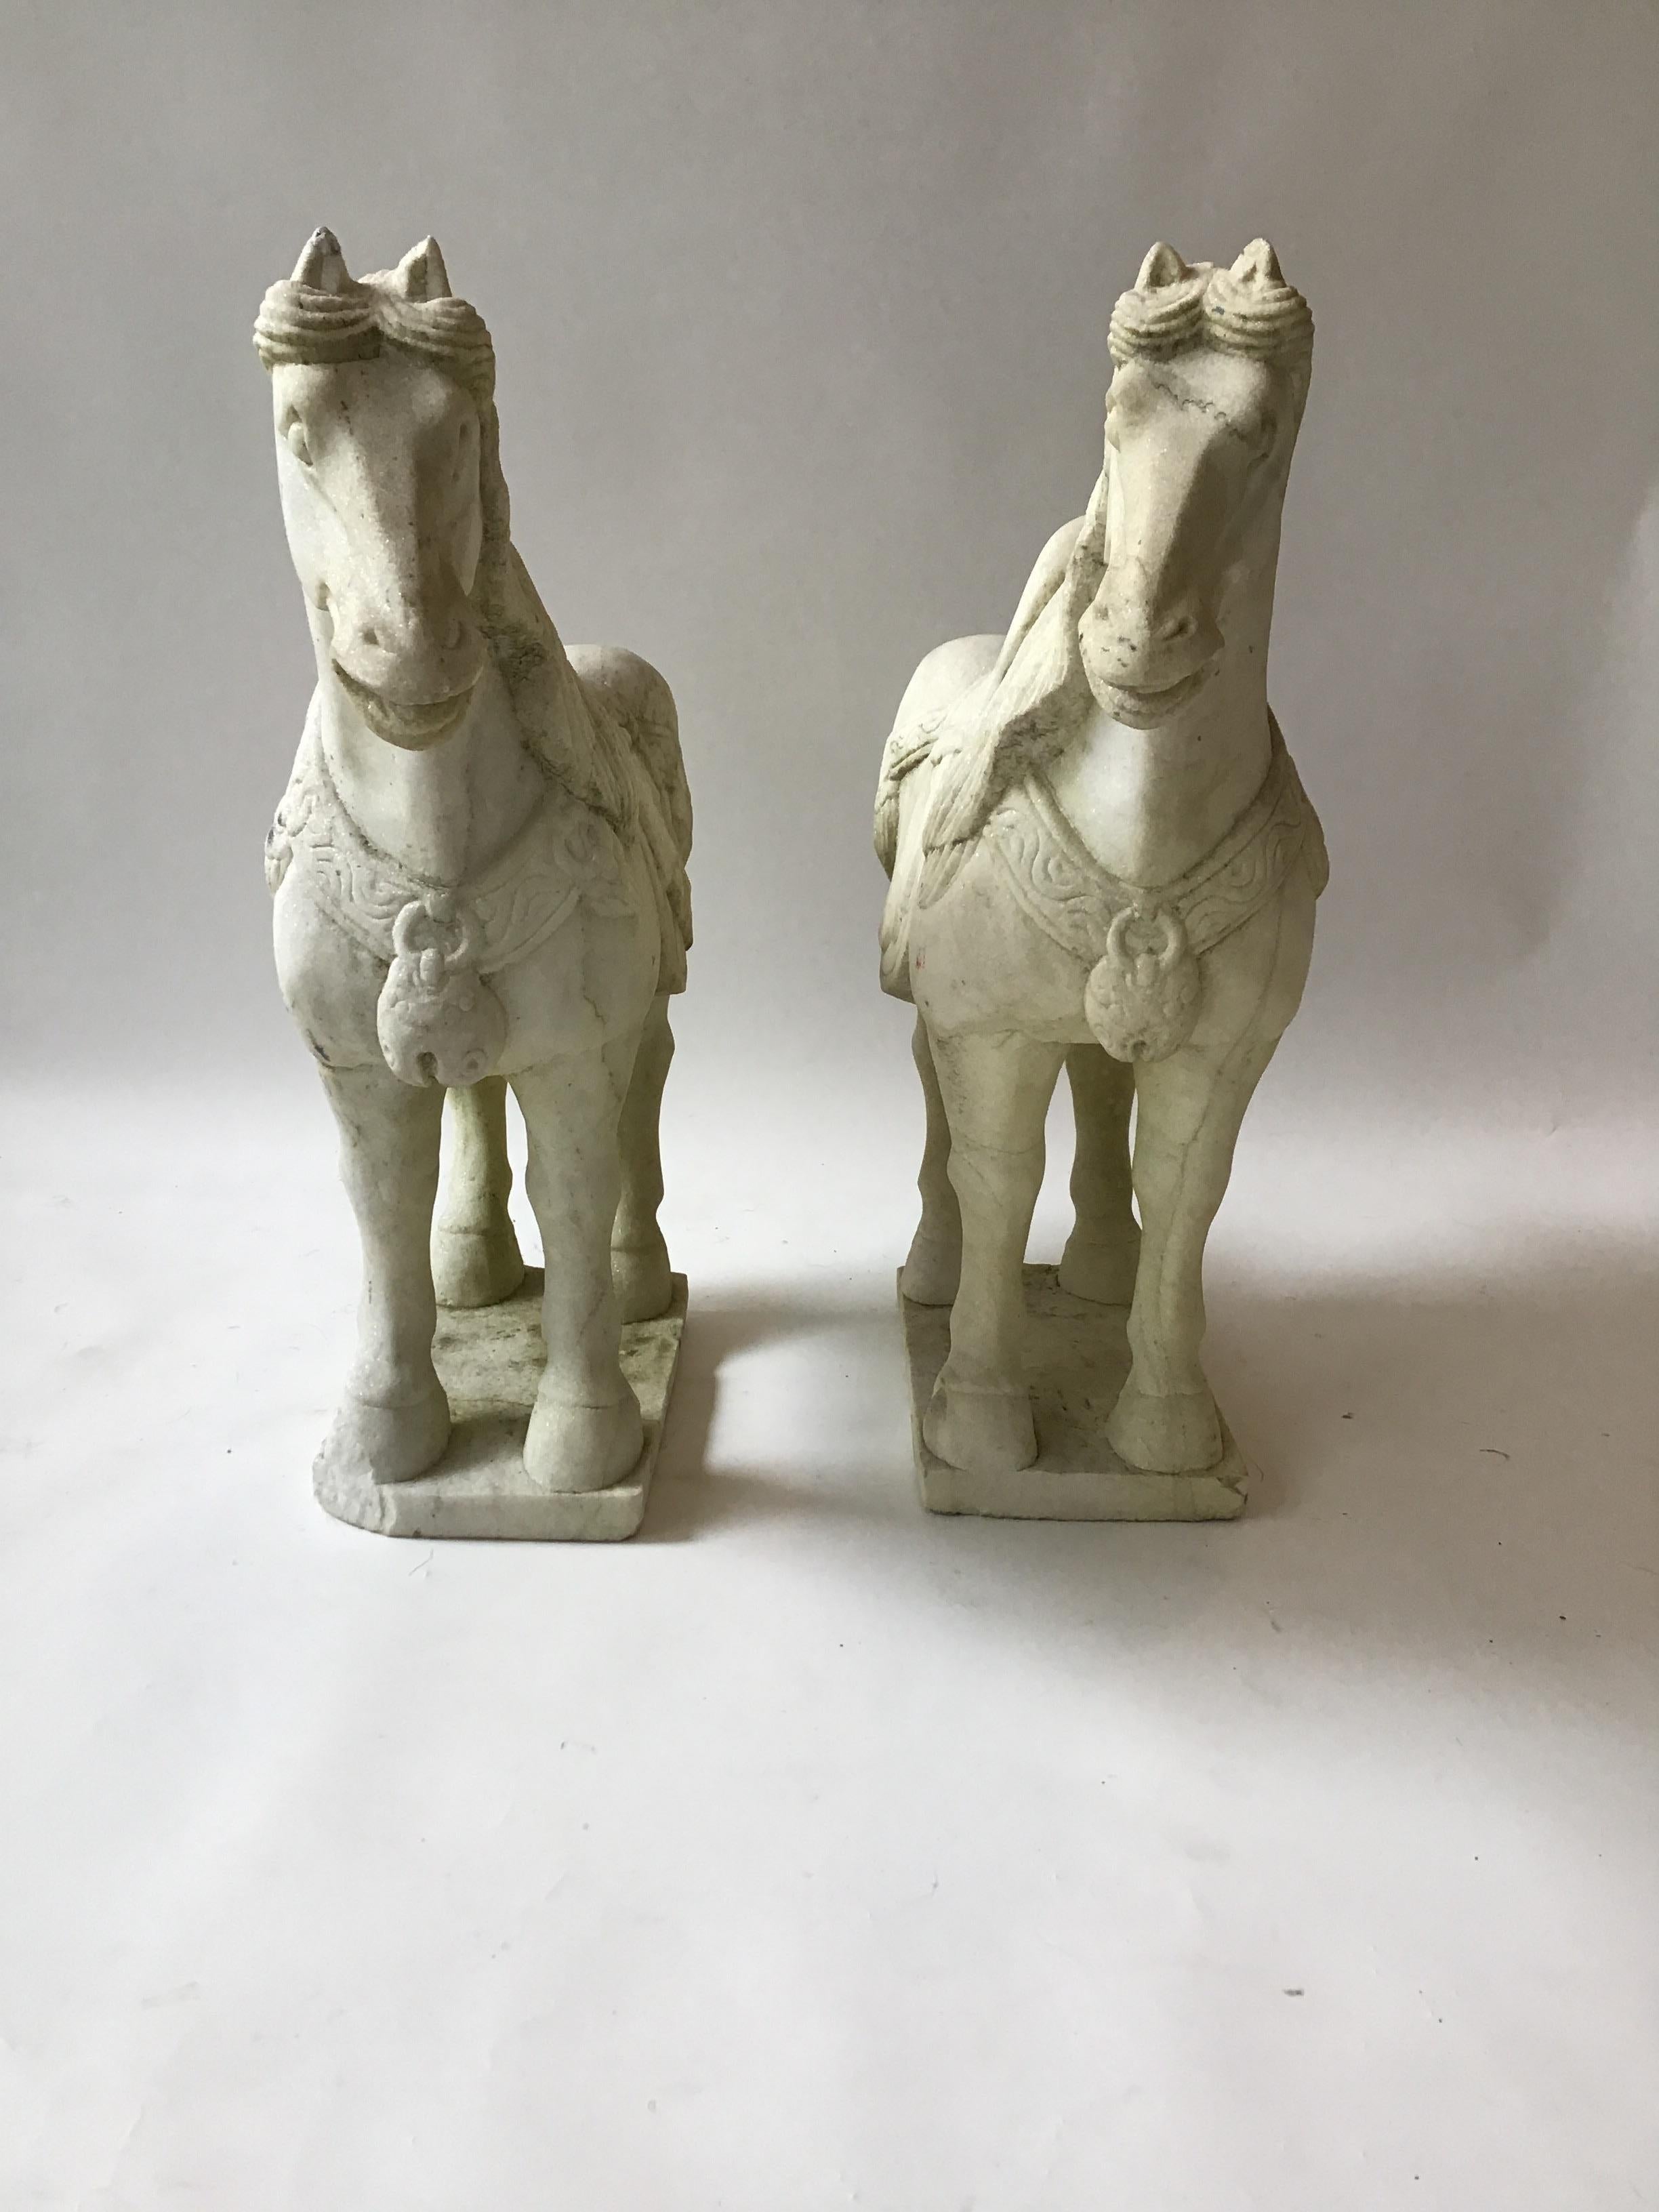 Pair of beautiful 1960s carved marble Asian horses. From a Southampton, NY estate where they guarded the front door.